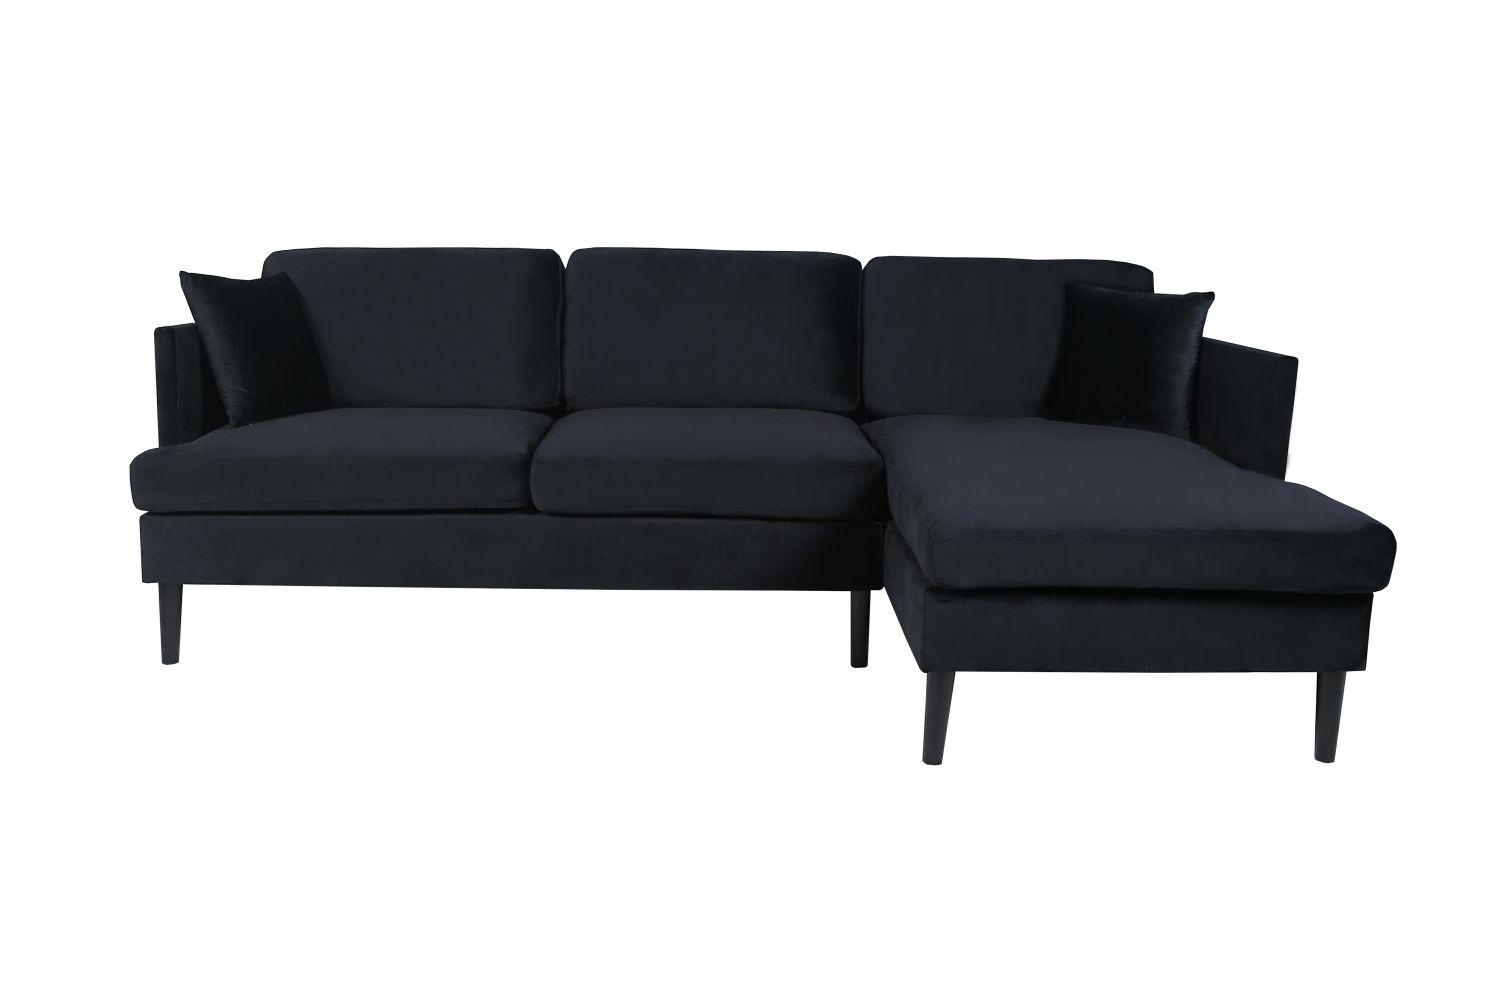 L-shape Sectional Sofa Velvet Right Hand Facing with Solid Wood Legs and Removable and Washable Seat Cover，Black - image 2 of 7